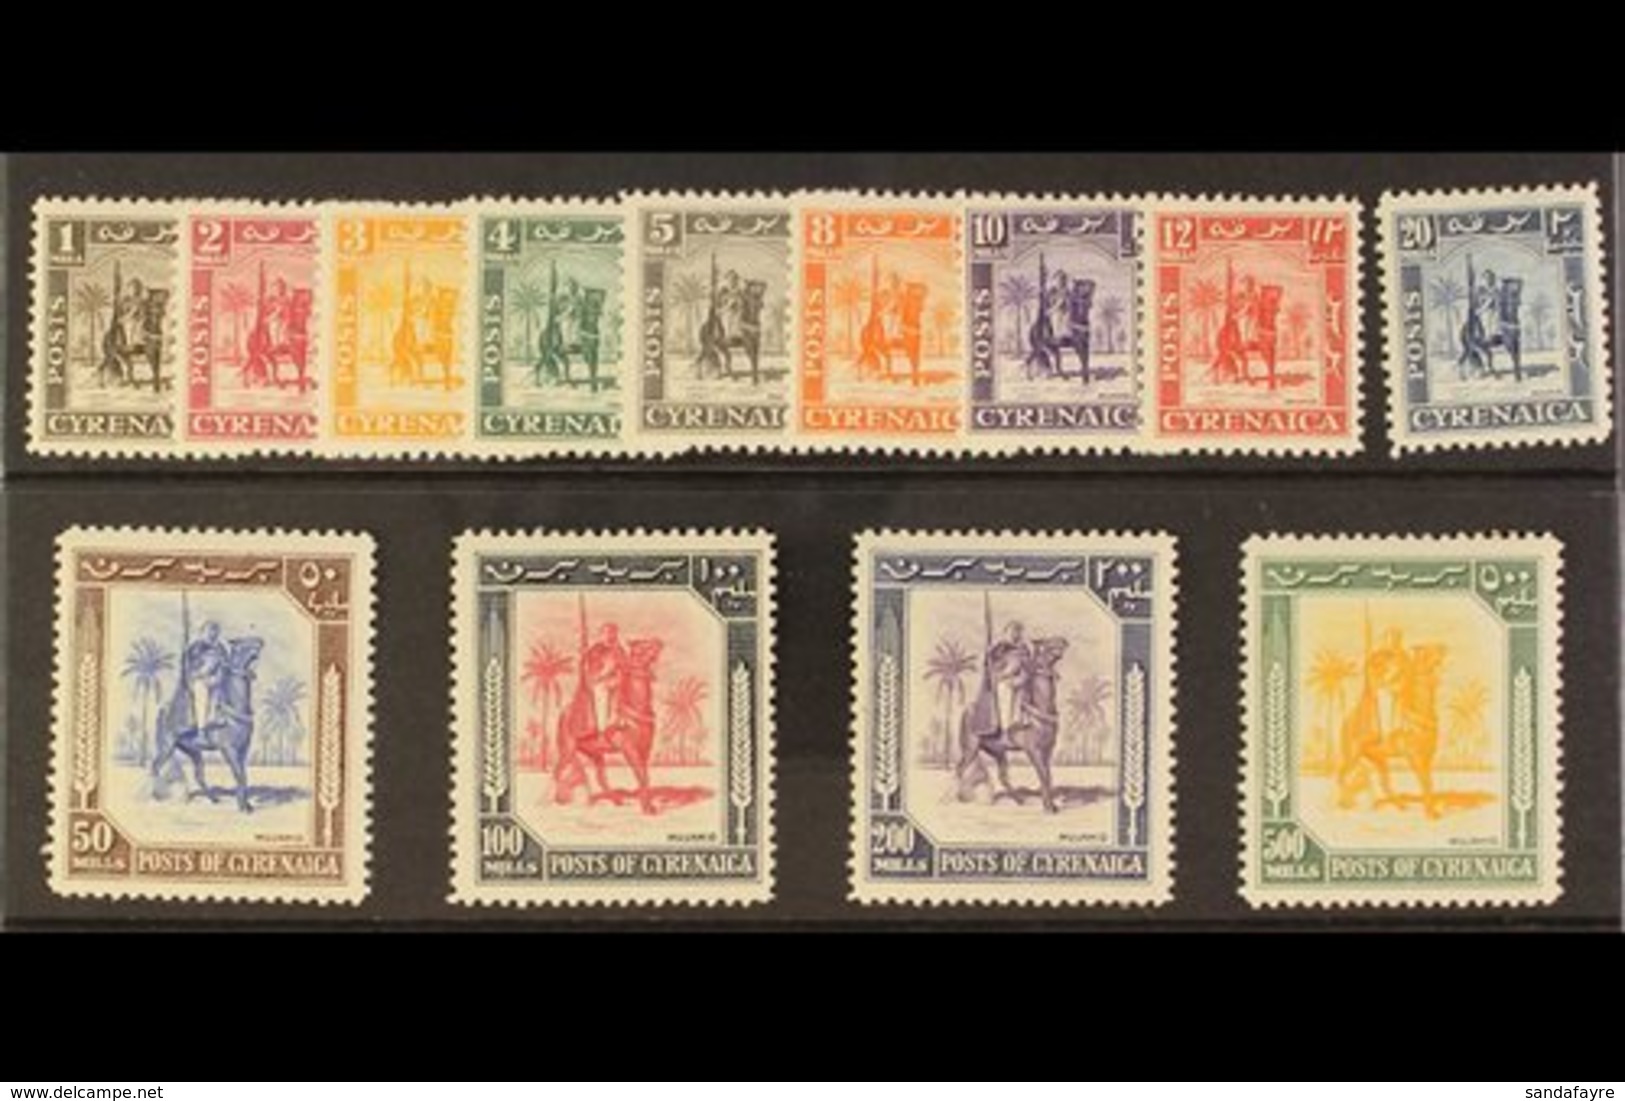 \Y CYRENAICA\Y 1950 Definitives Complete Set, SG 136/48, Very Fine Never Hinged Mint. (13 Stamps) For More Images, Pleas - Italian Eastern Africa